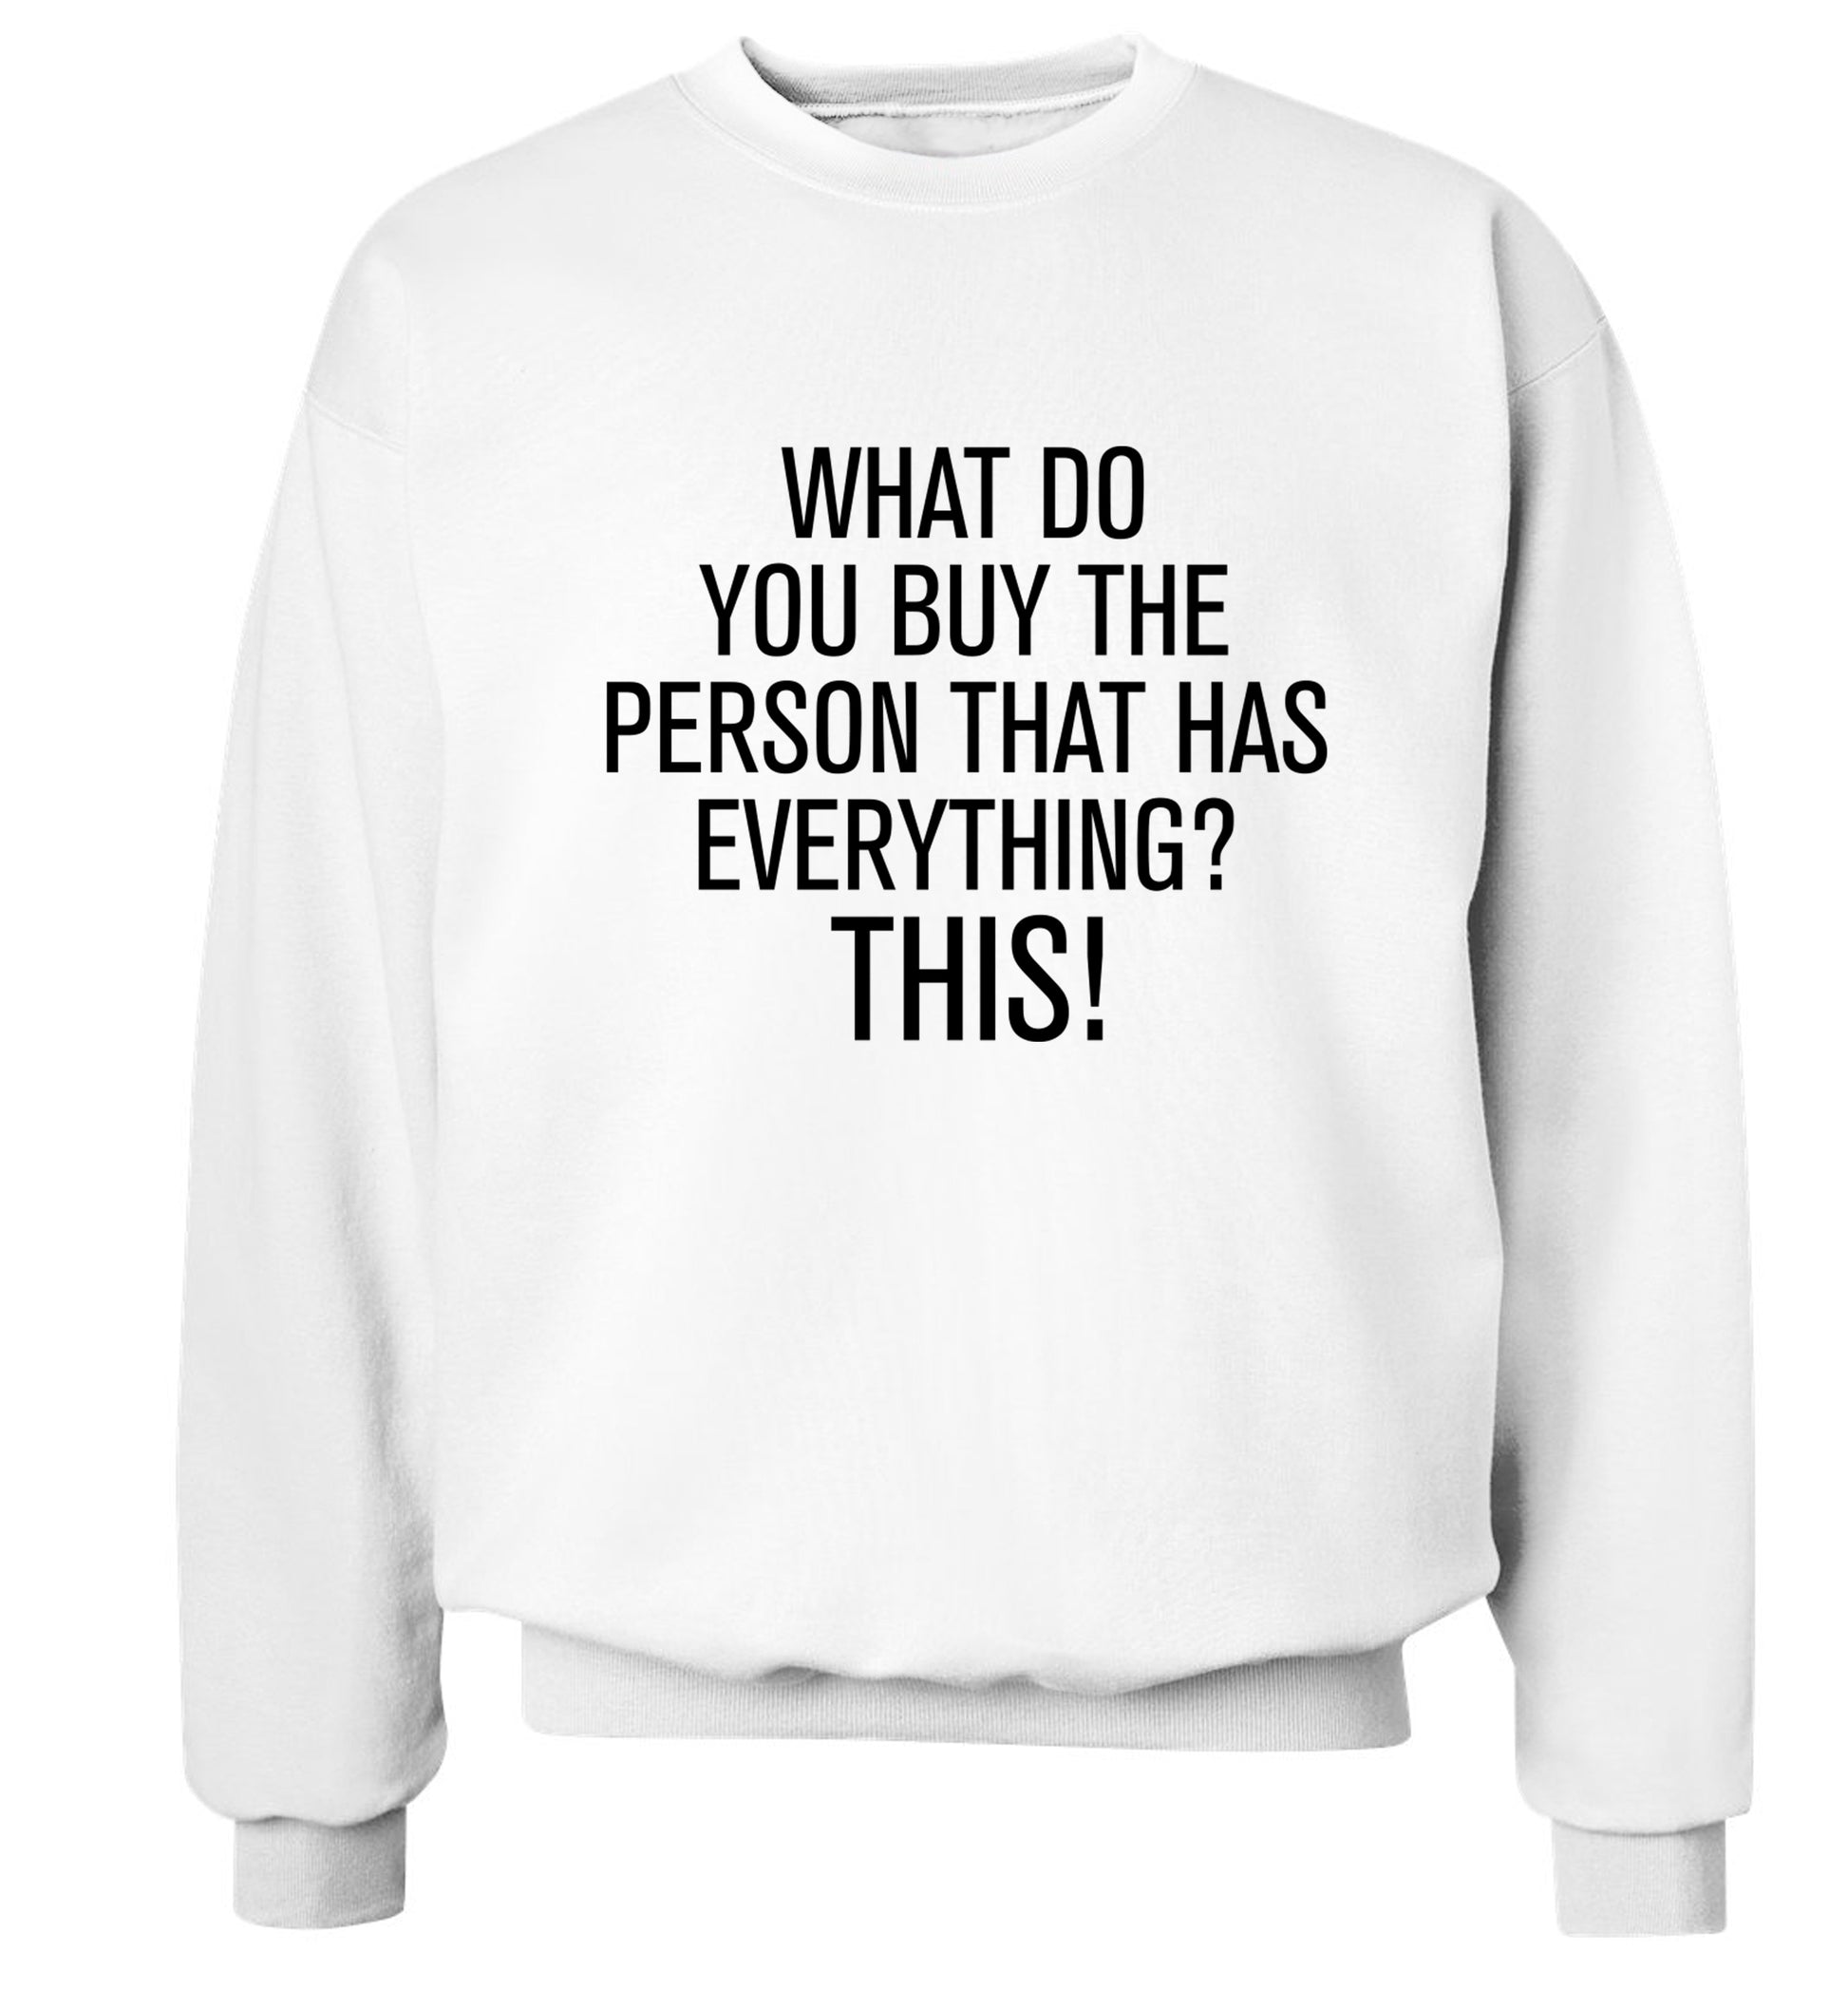 What do you buy the person that has everything? This! Adult's unisex white Sweater 2XL